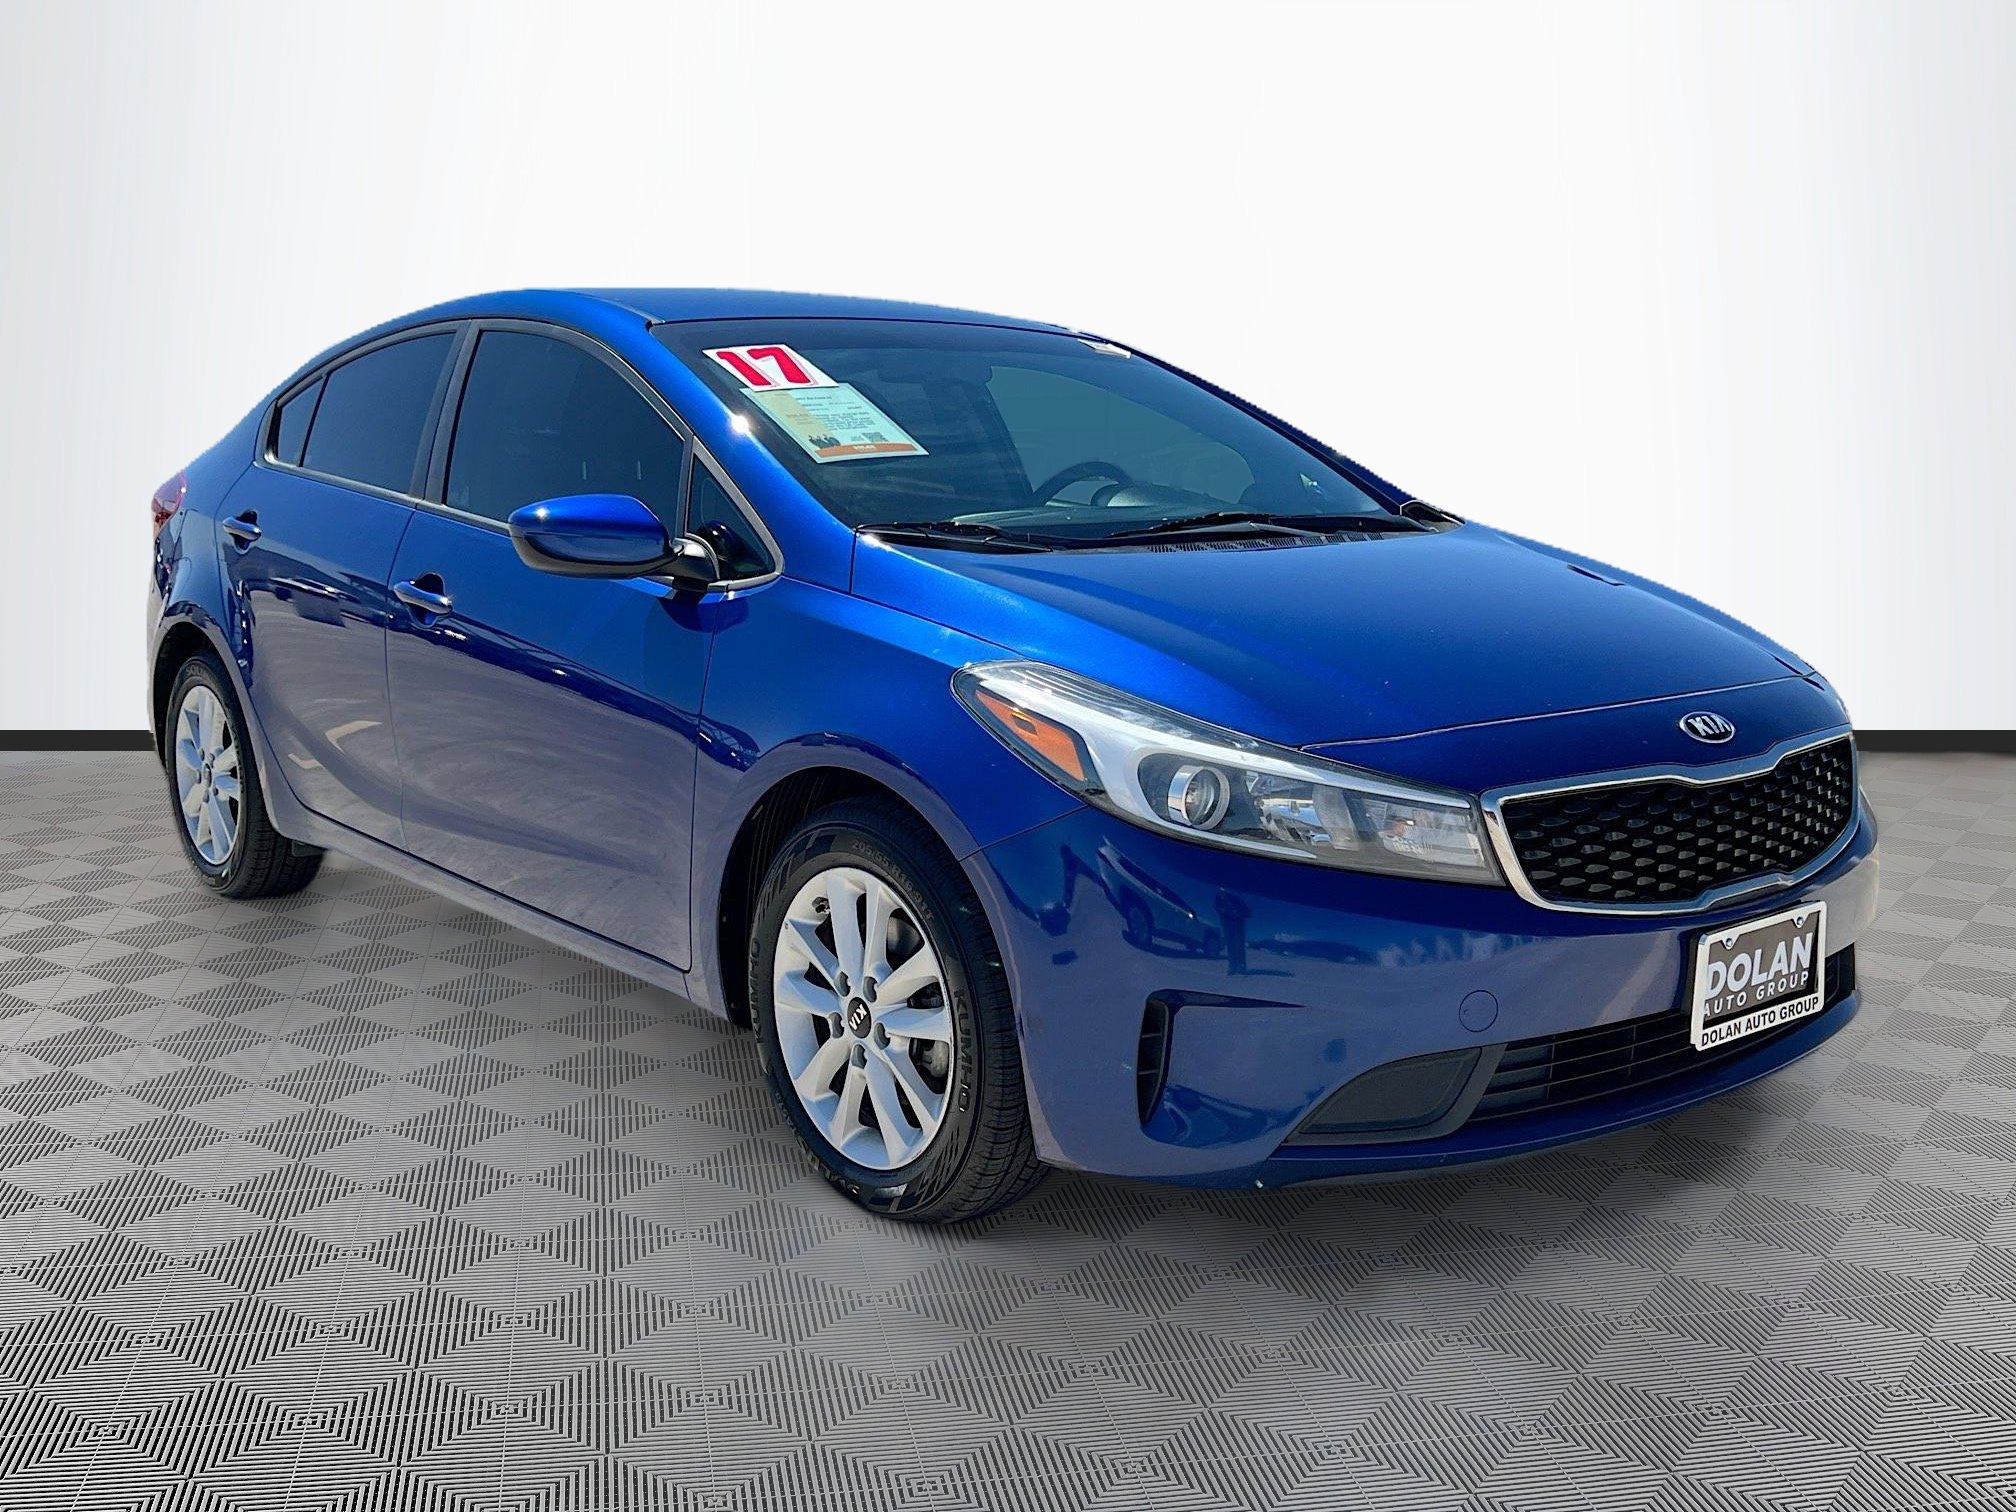 Used 2017 Kia Forte LX with VIN 3KPFL4A7XHE018500 for sale in Reno, NV